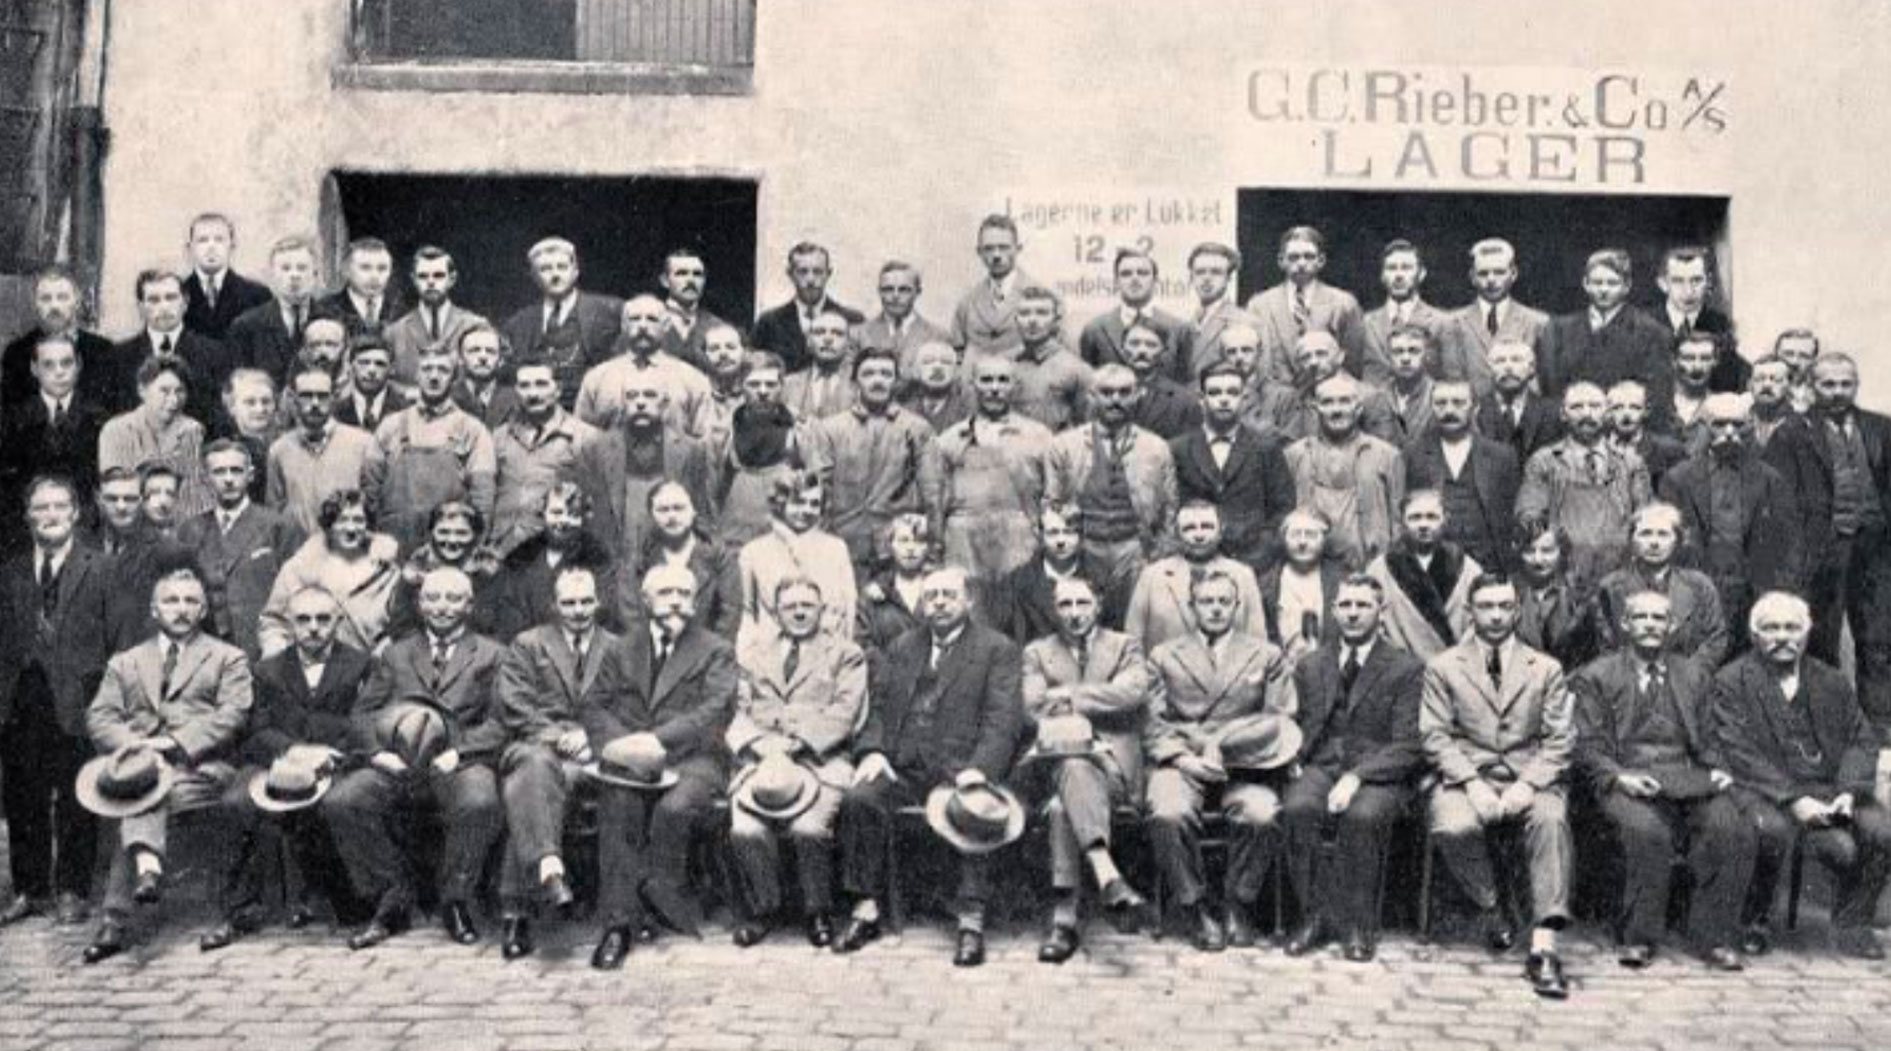 Old photo of GC Rieber workers